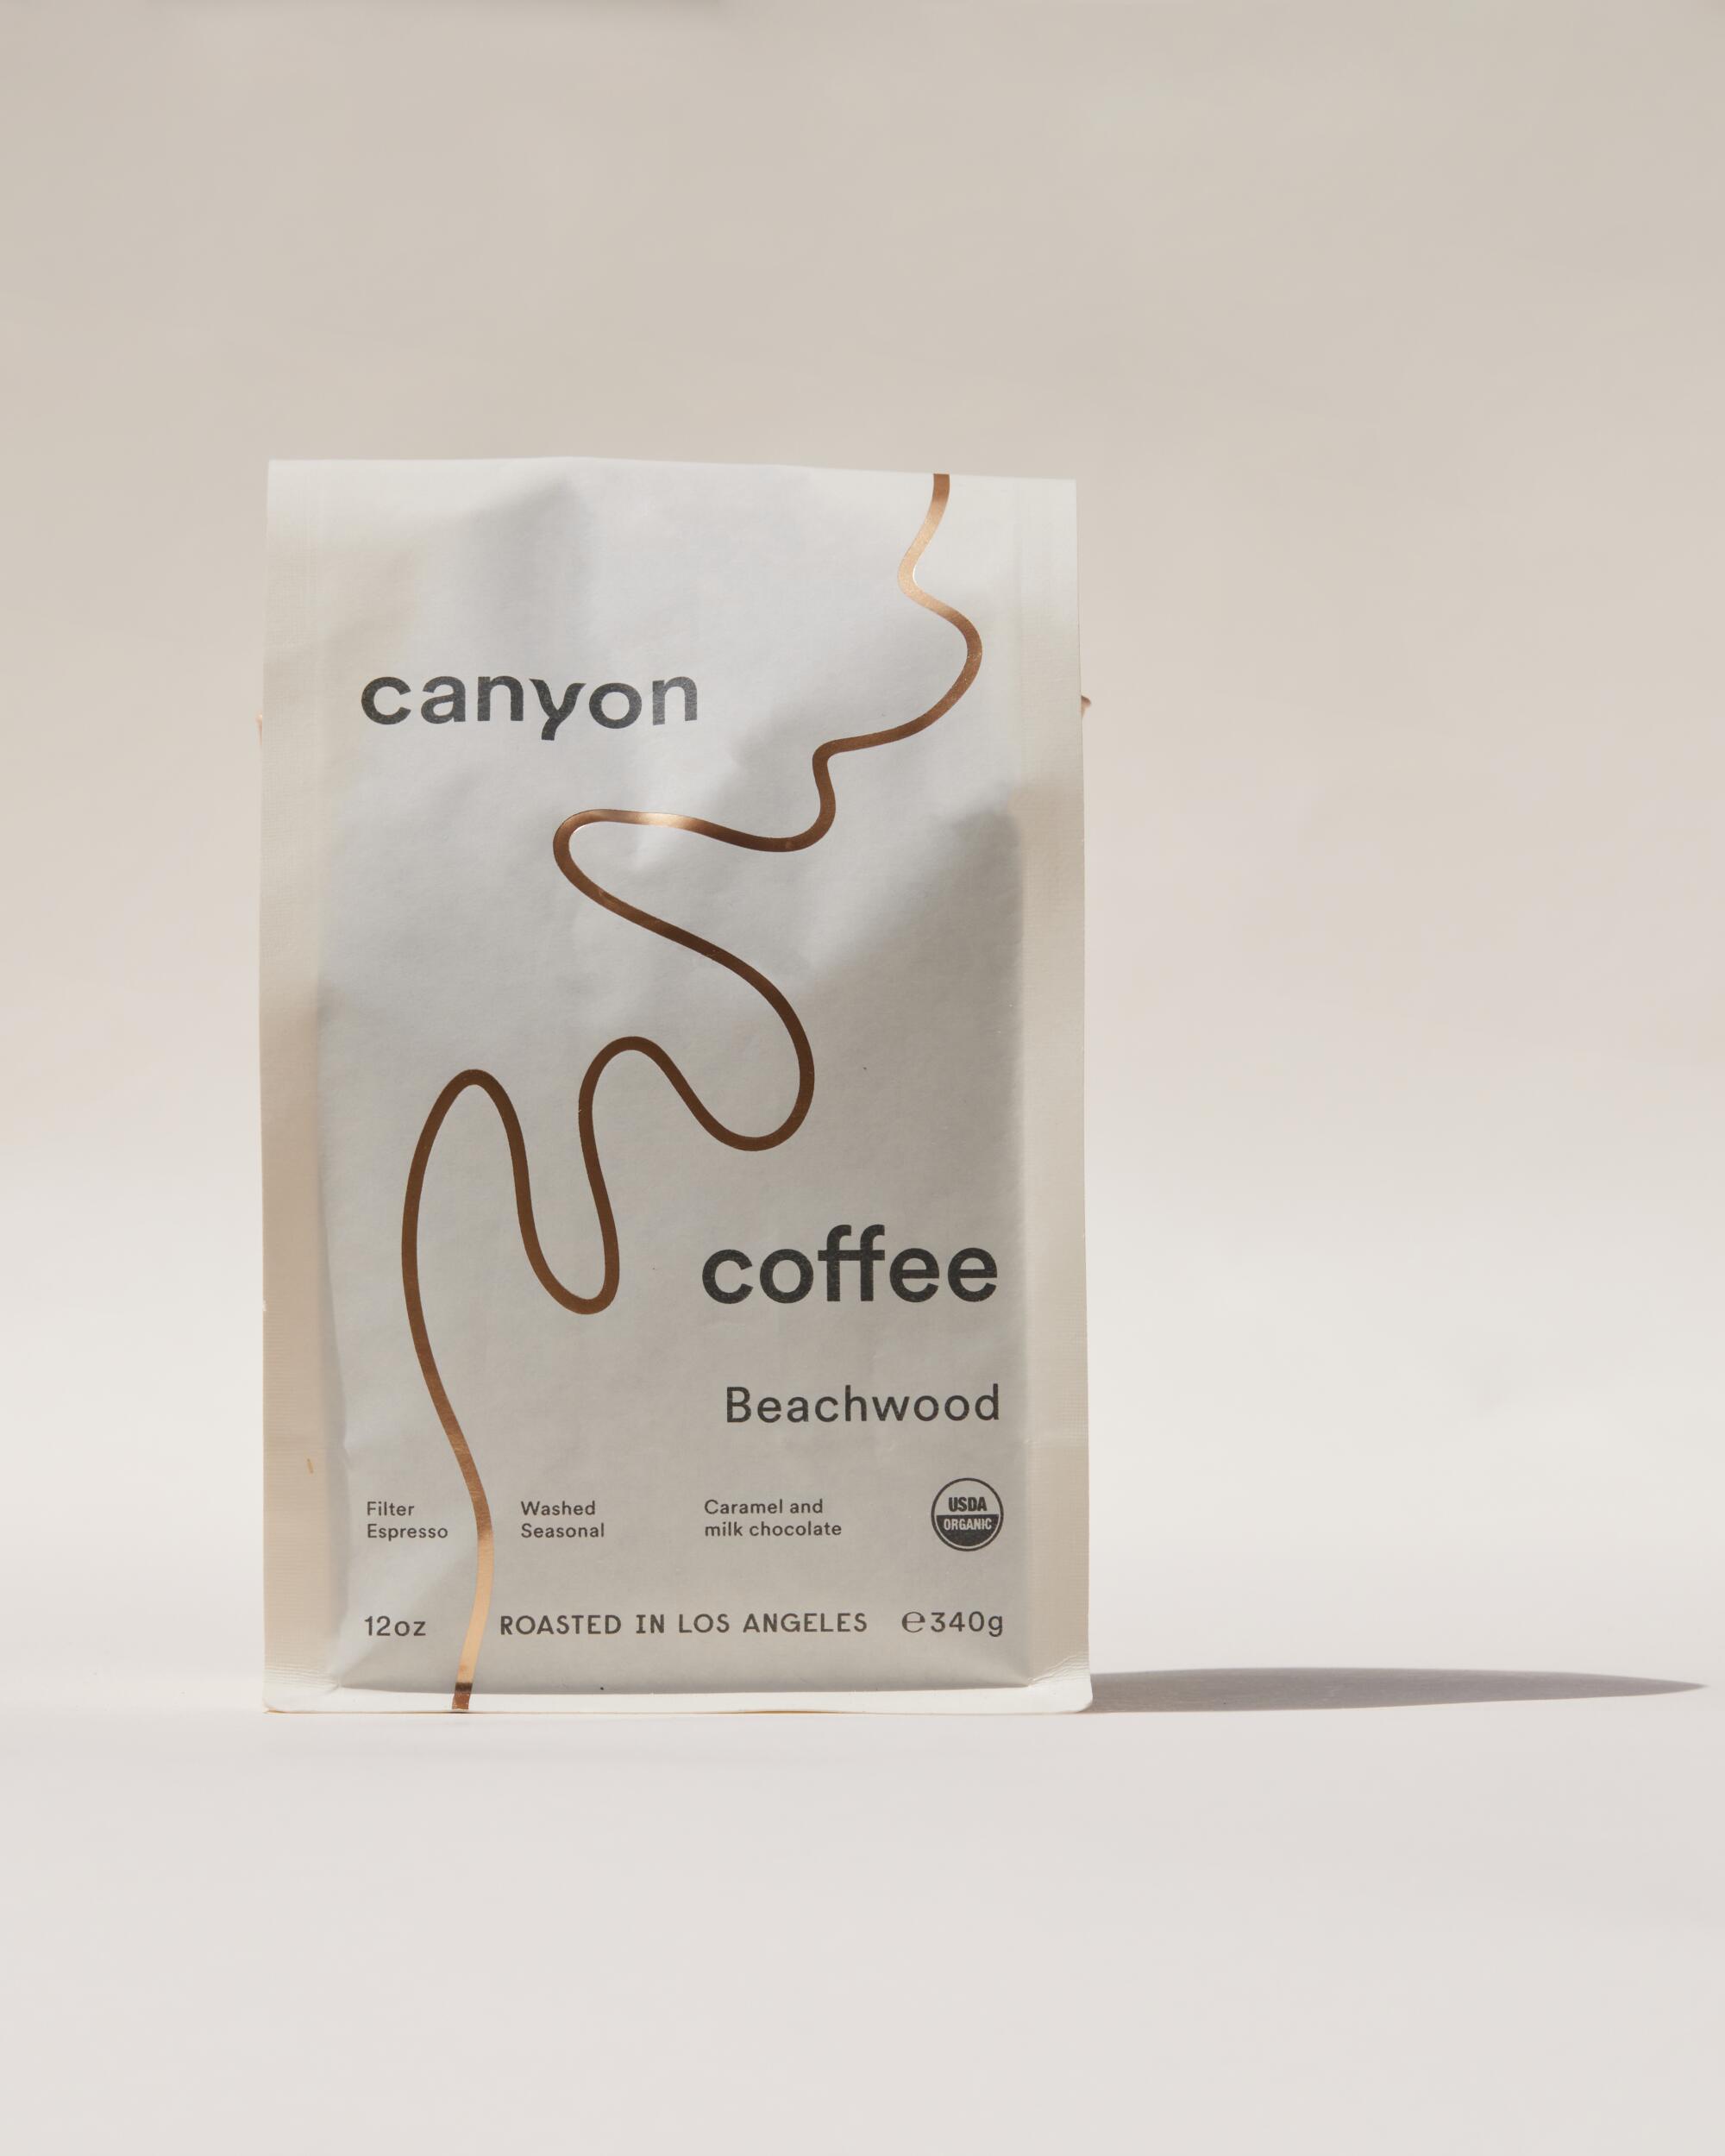 A pound of coffee from Canyon Coffee